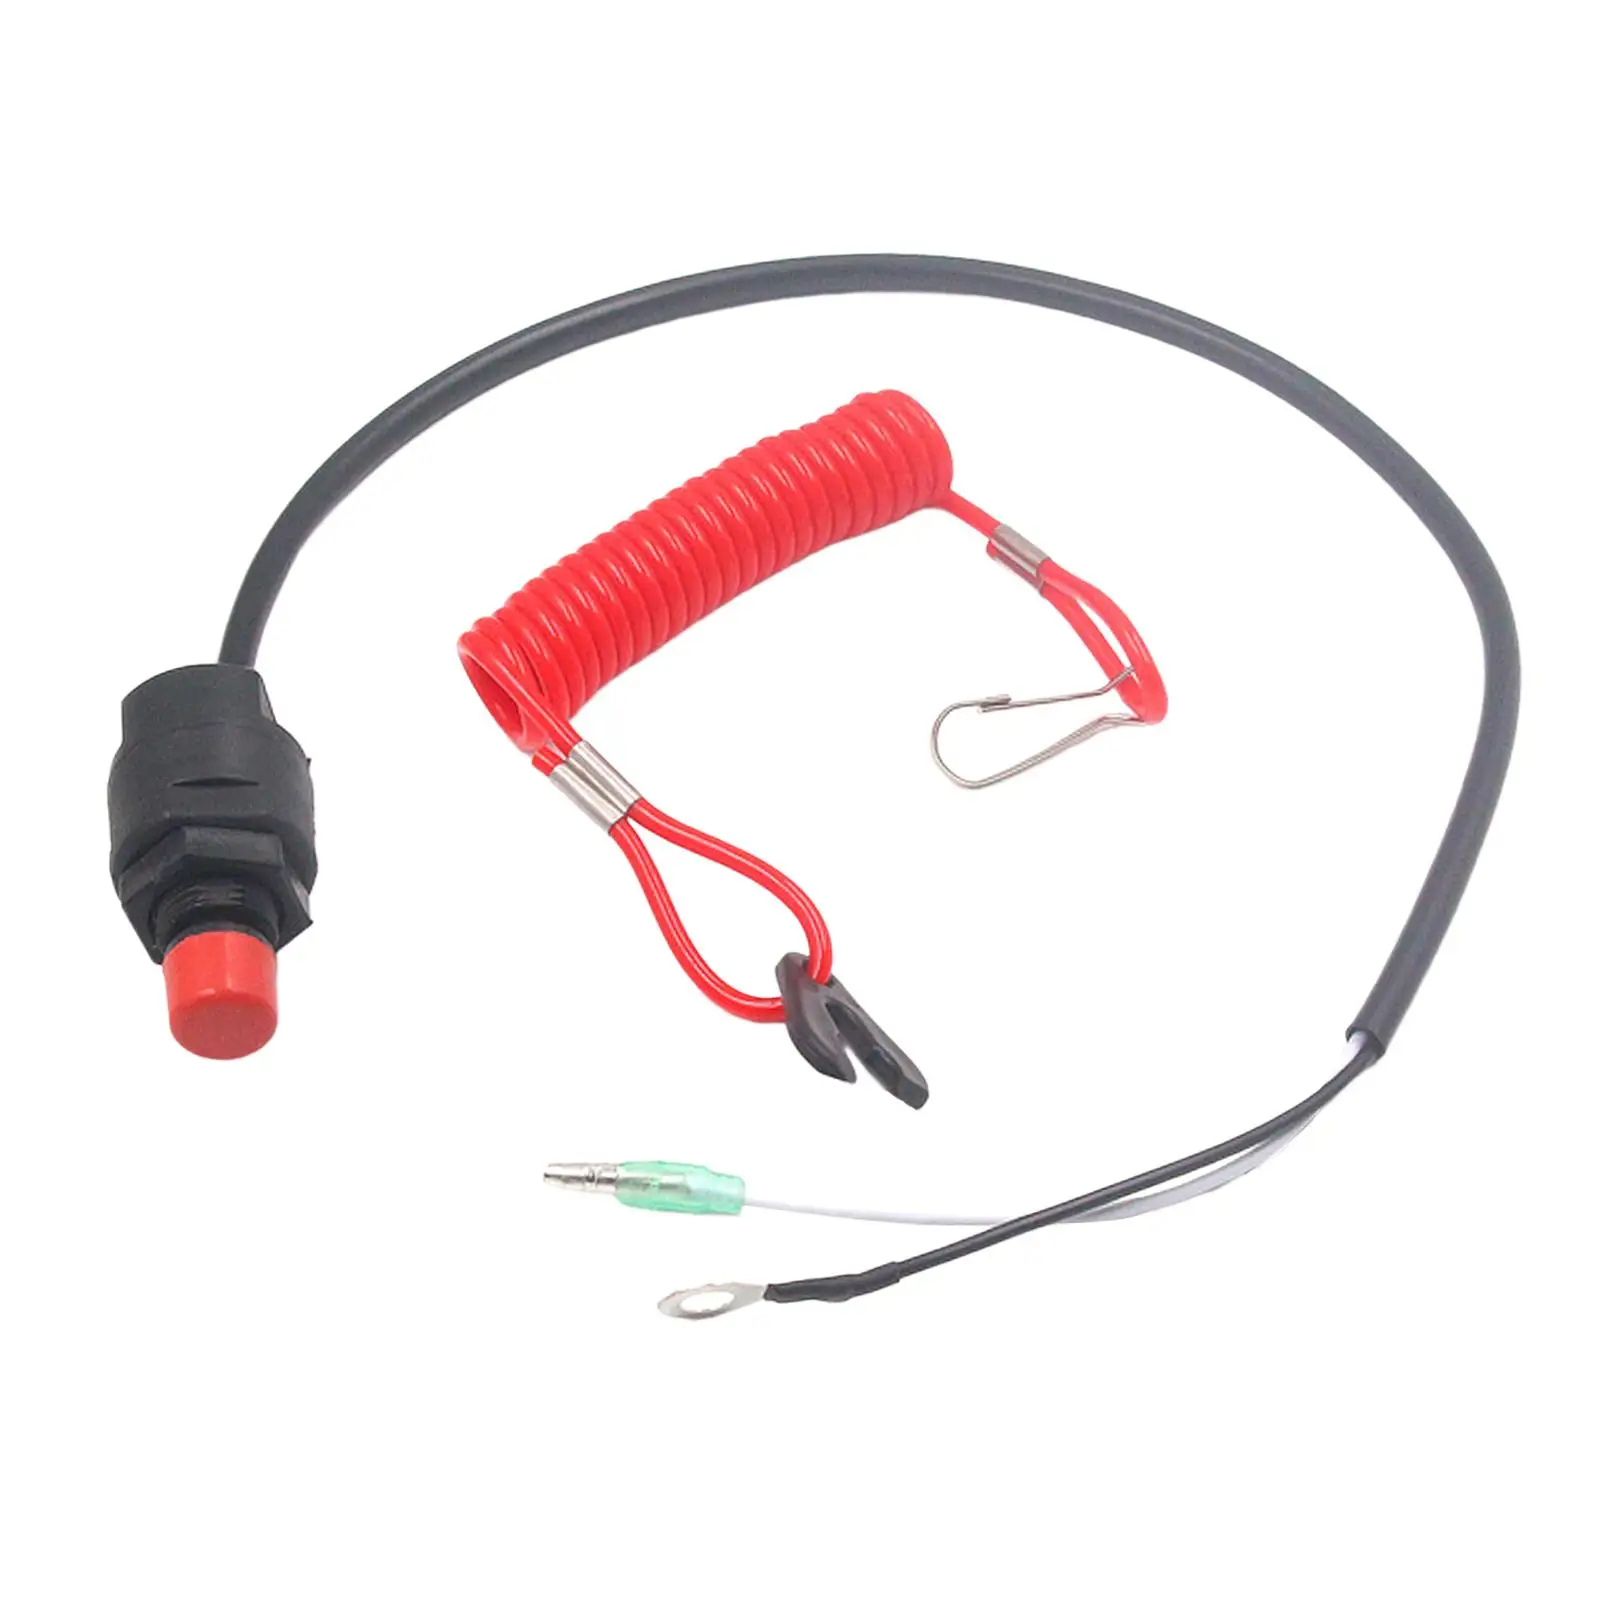 Waterproof Boat Kill Switch Safety Connector Cord for Supplies Replaces